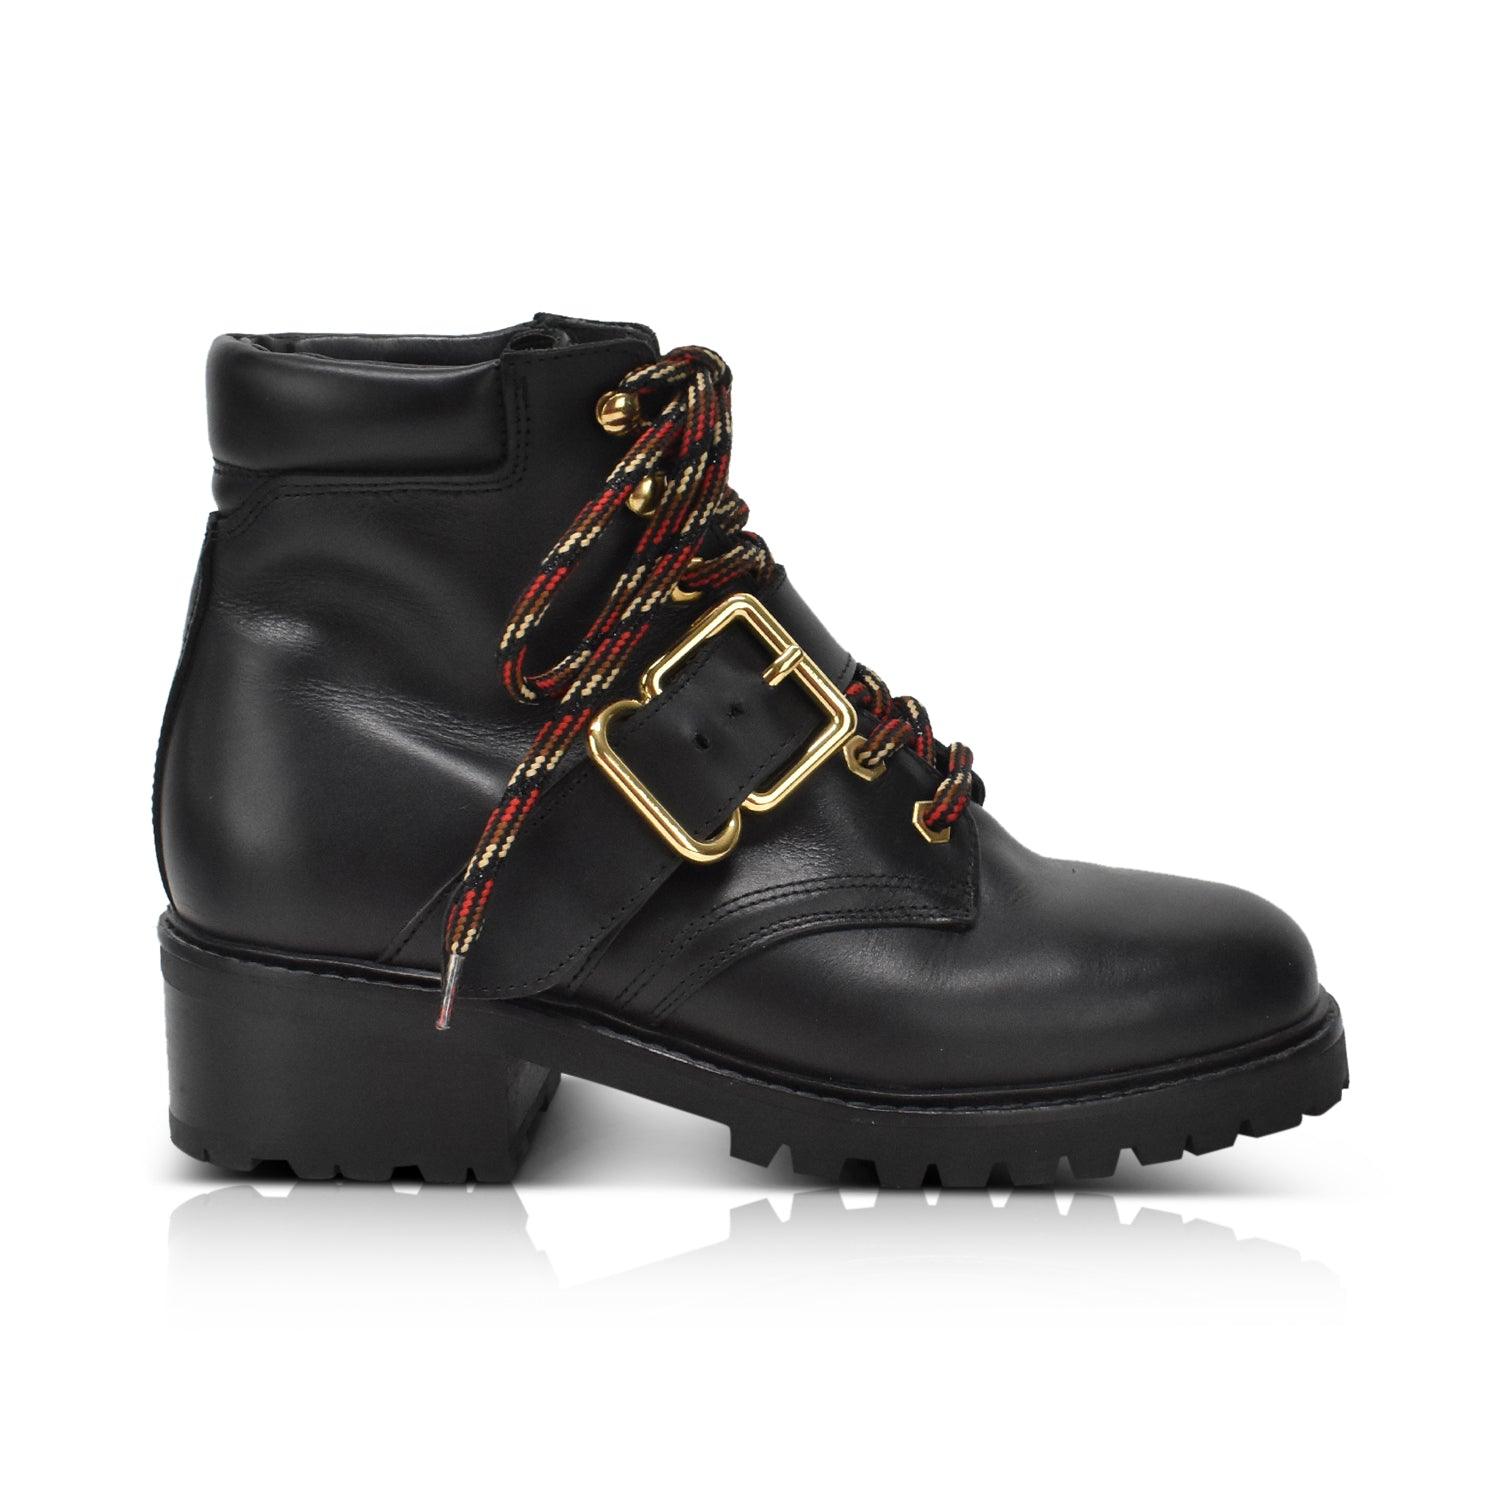 Sandro Combat Boots - Women's 40 - Fashionably Yours